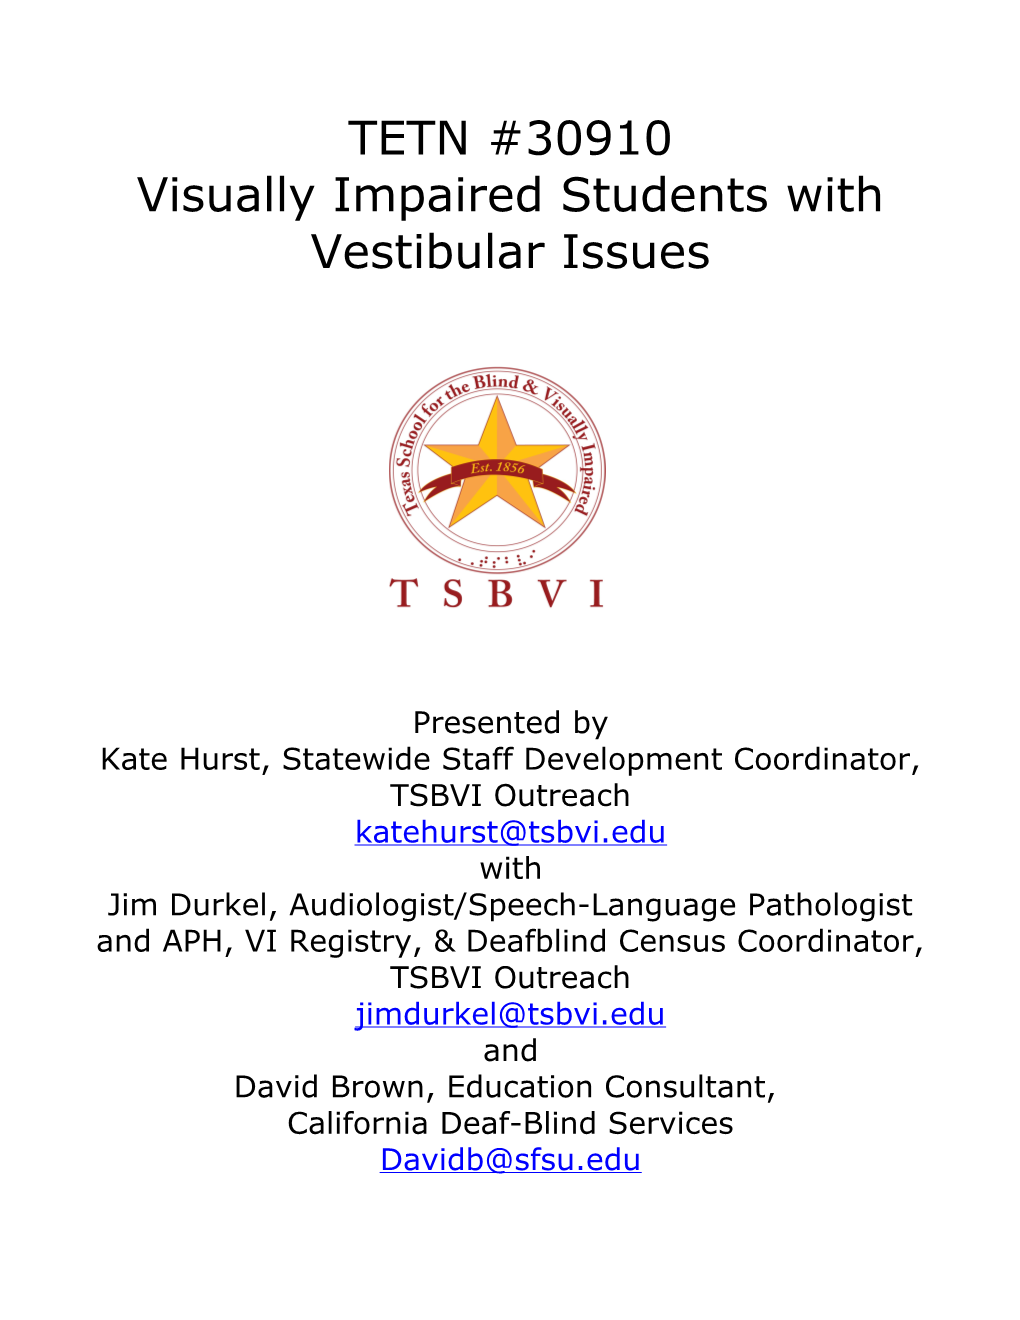 Visually Impaired Students with Vestibular Issues